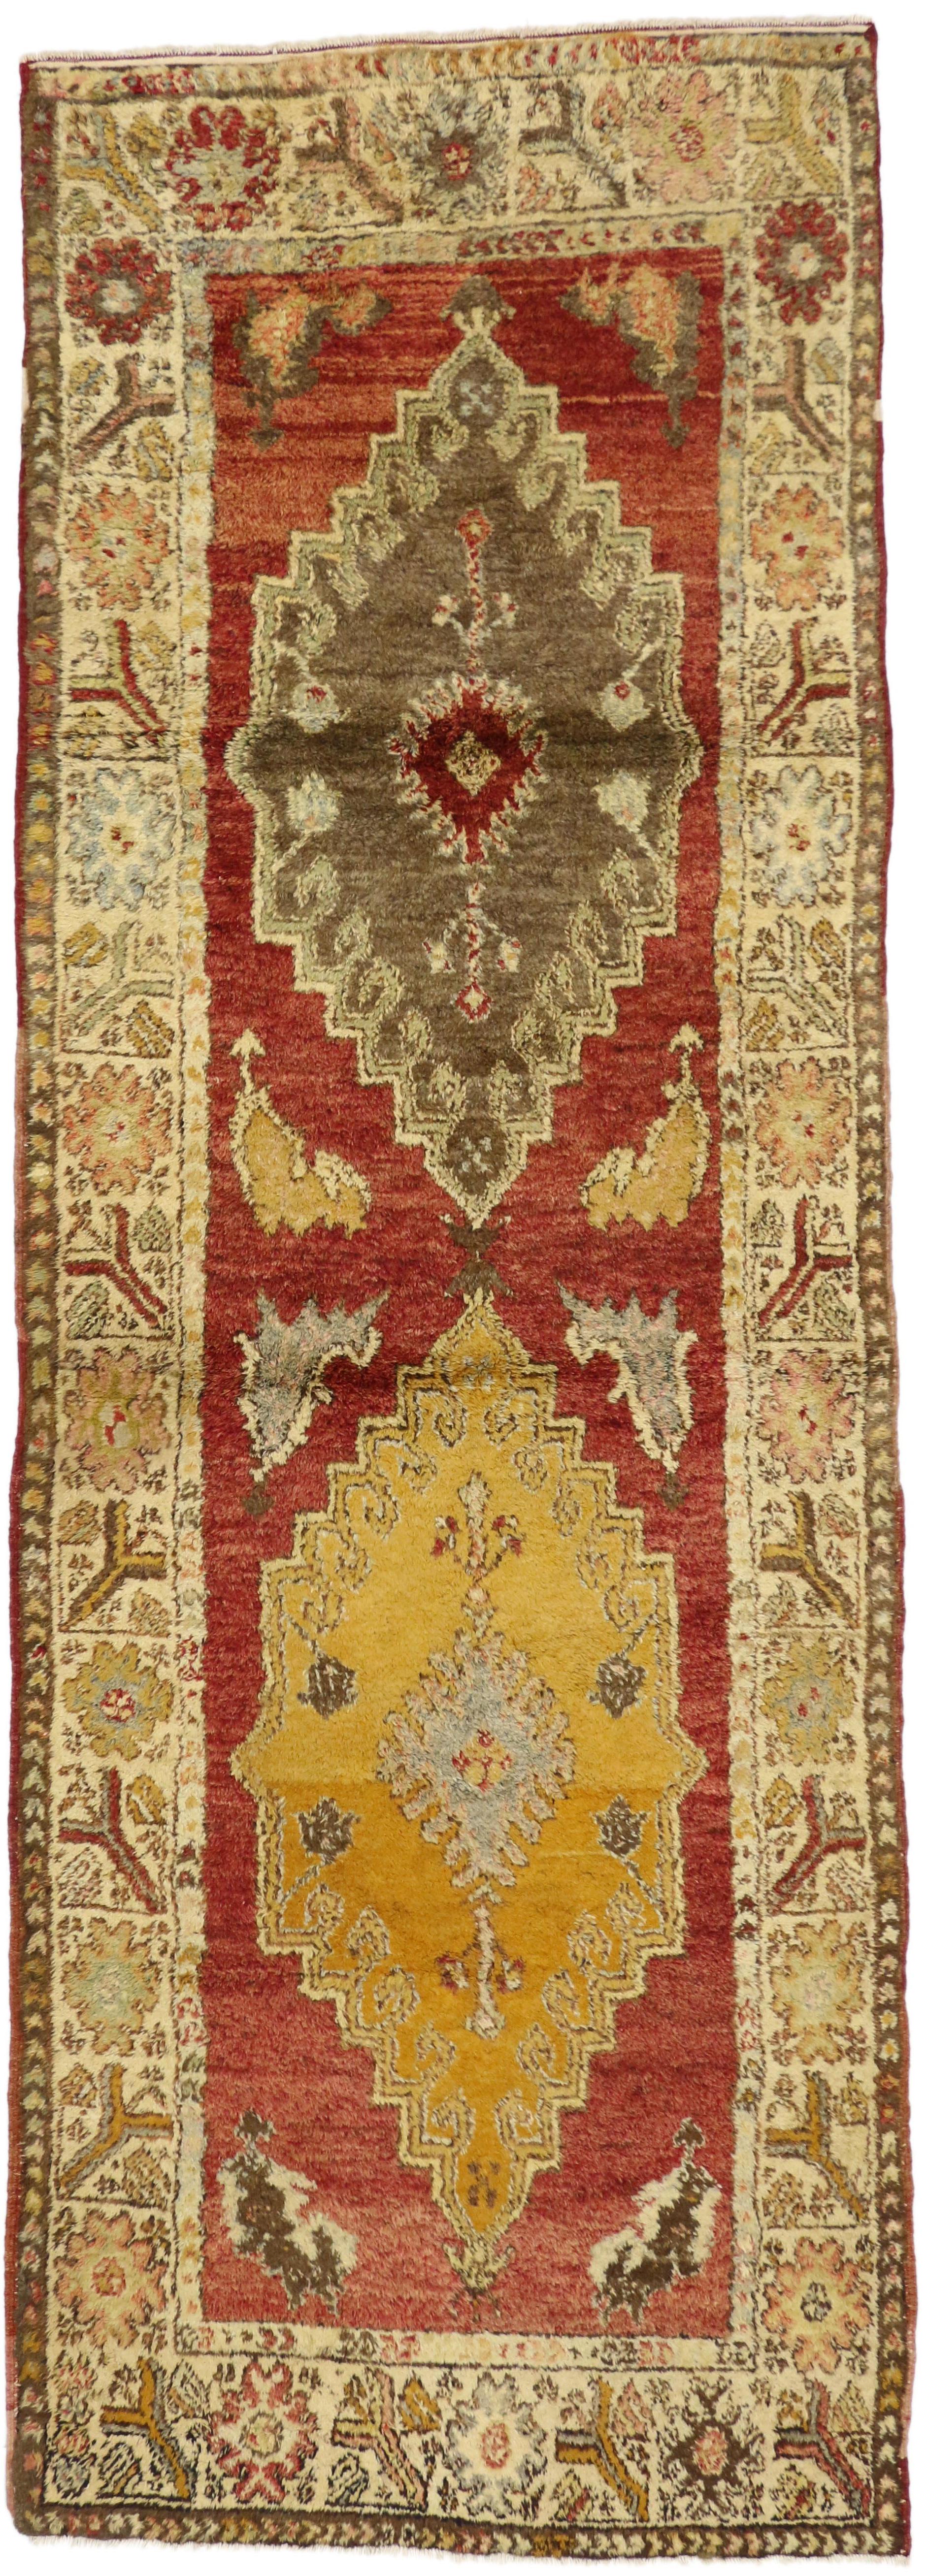 50926 Vintage Turkish Oushak Runner with Mid-Century Modern Tribal Style 03'08 x 10'05. Warm and inviting with rich earthy colors, this hand-knotted wool vintage Turkish Oushak runner beautifully embodies Mid-Century Modern style with nomadic charm.